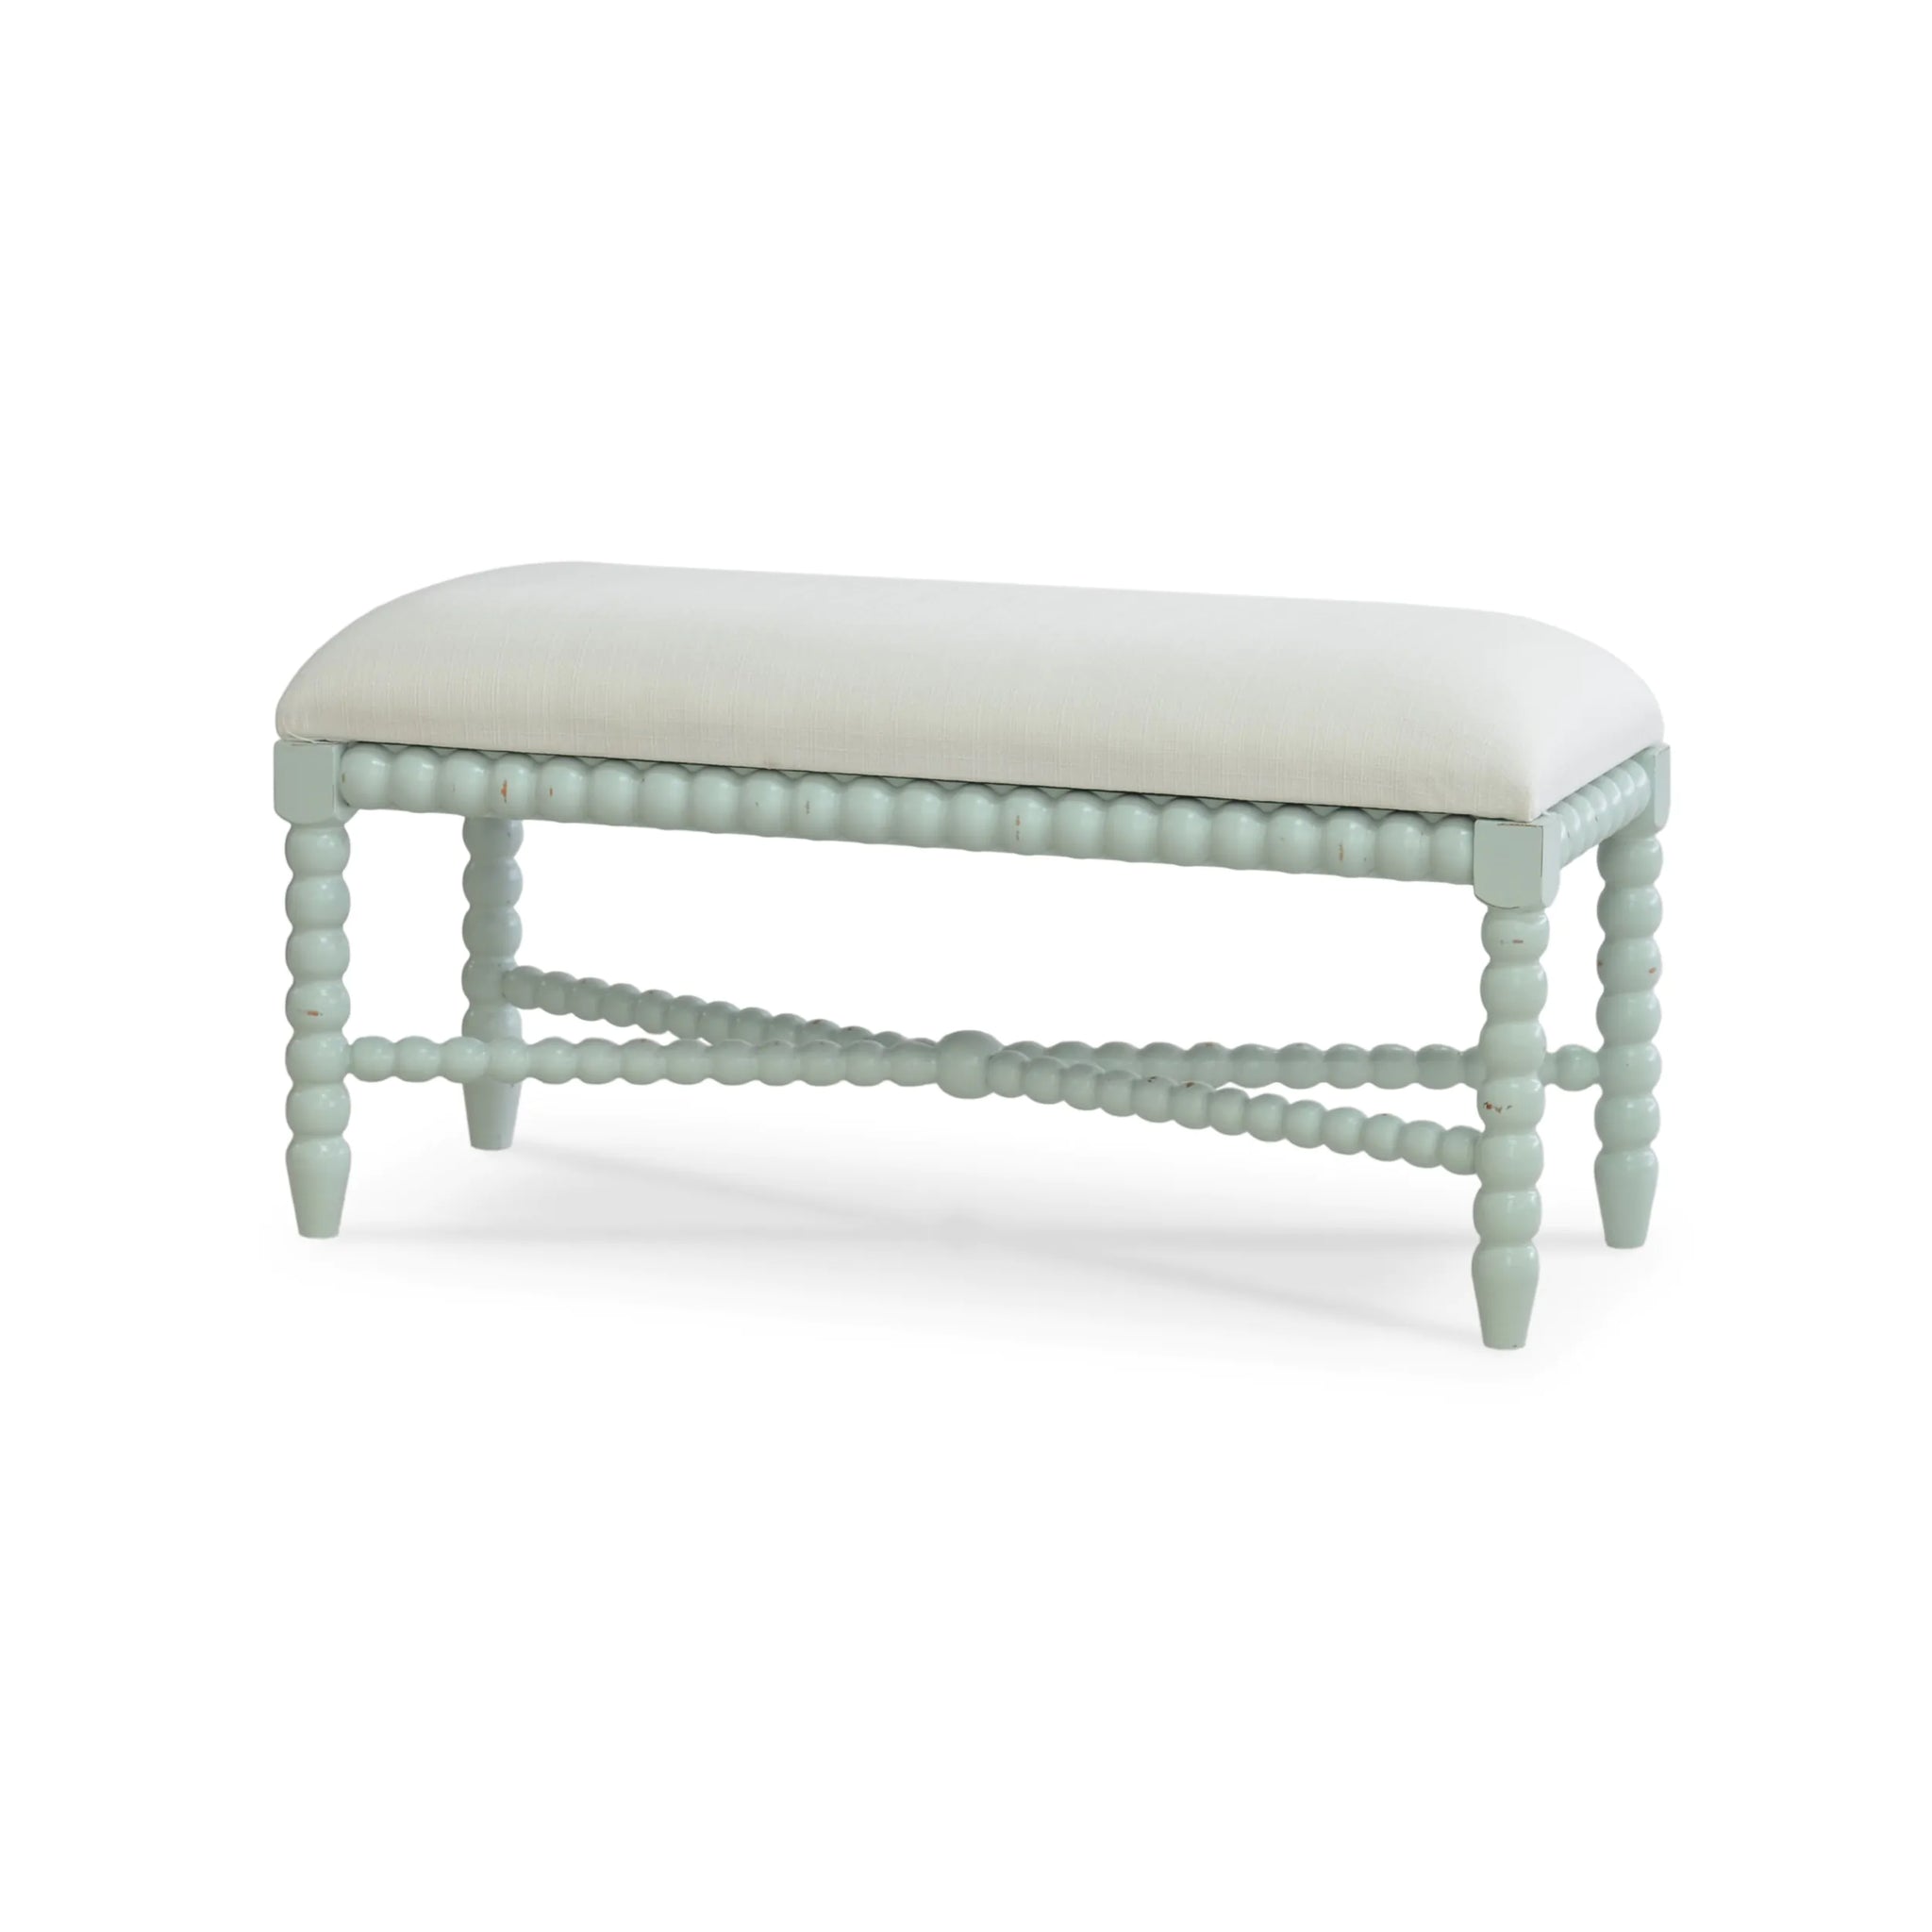 Cholet Bench-Small Fabric: SF204